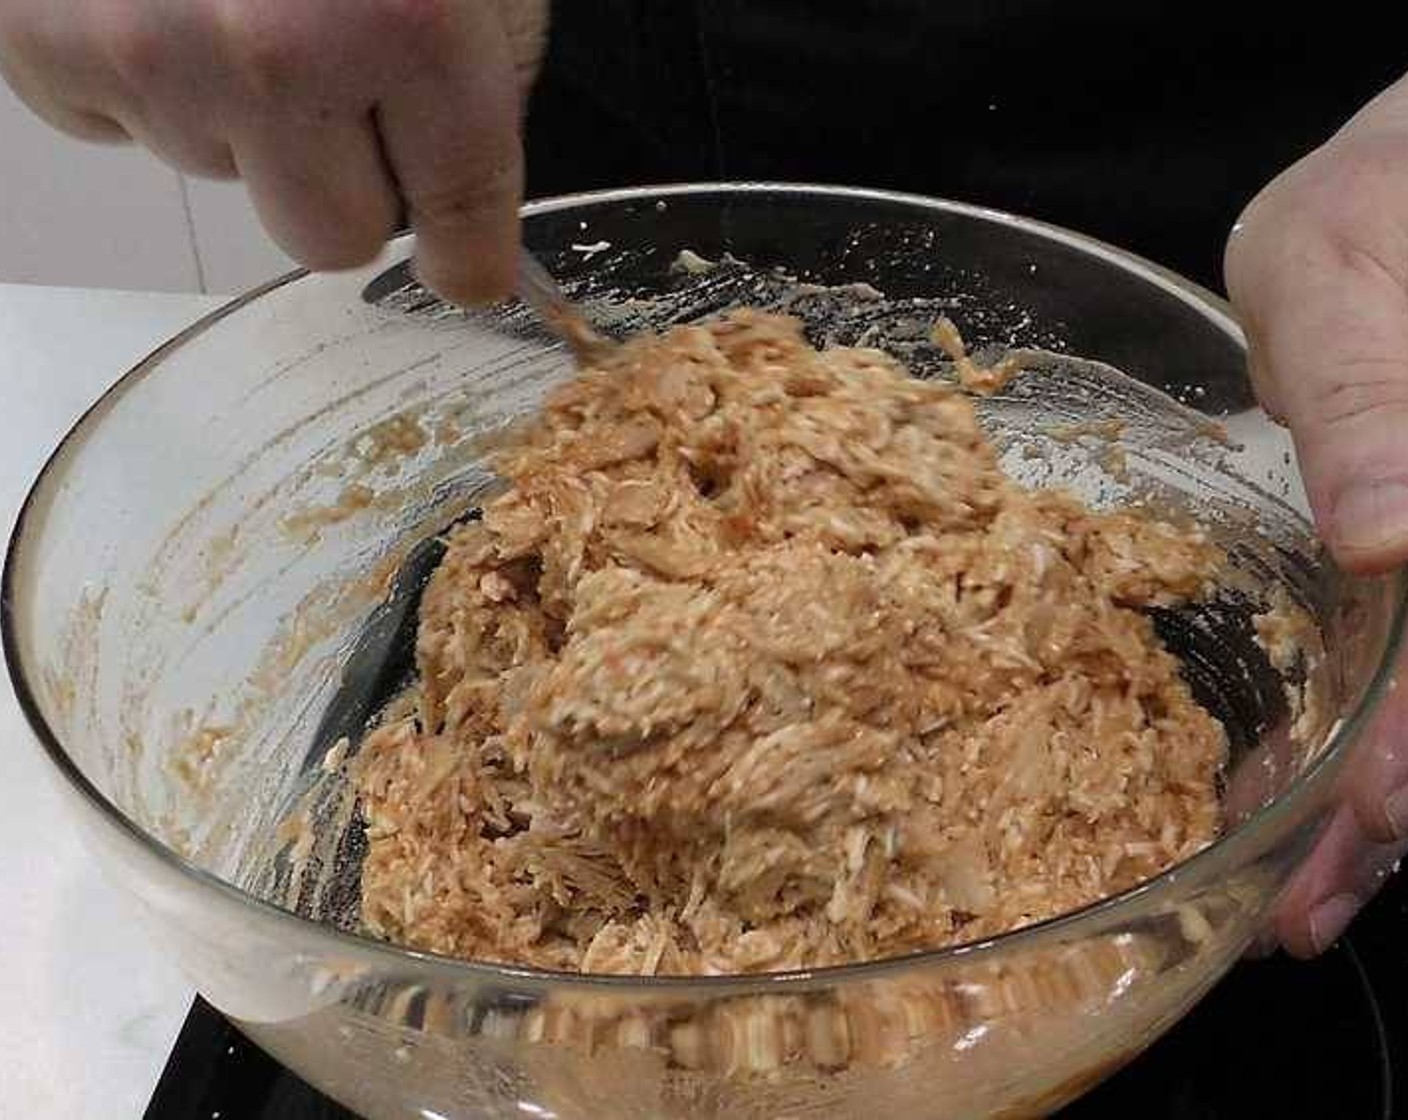 step 3 In a large bowl add the Canned Tuna in Olive Oil (1 cup), grate the Eggs (6) and add Tomato Sauce (to taste). You want the mixture to be wet but still hold its shape, so start with less, mix, then add more if needed. Mix thoroughly.